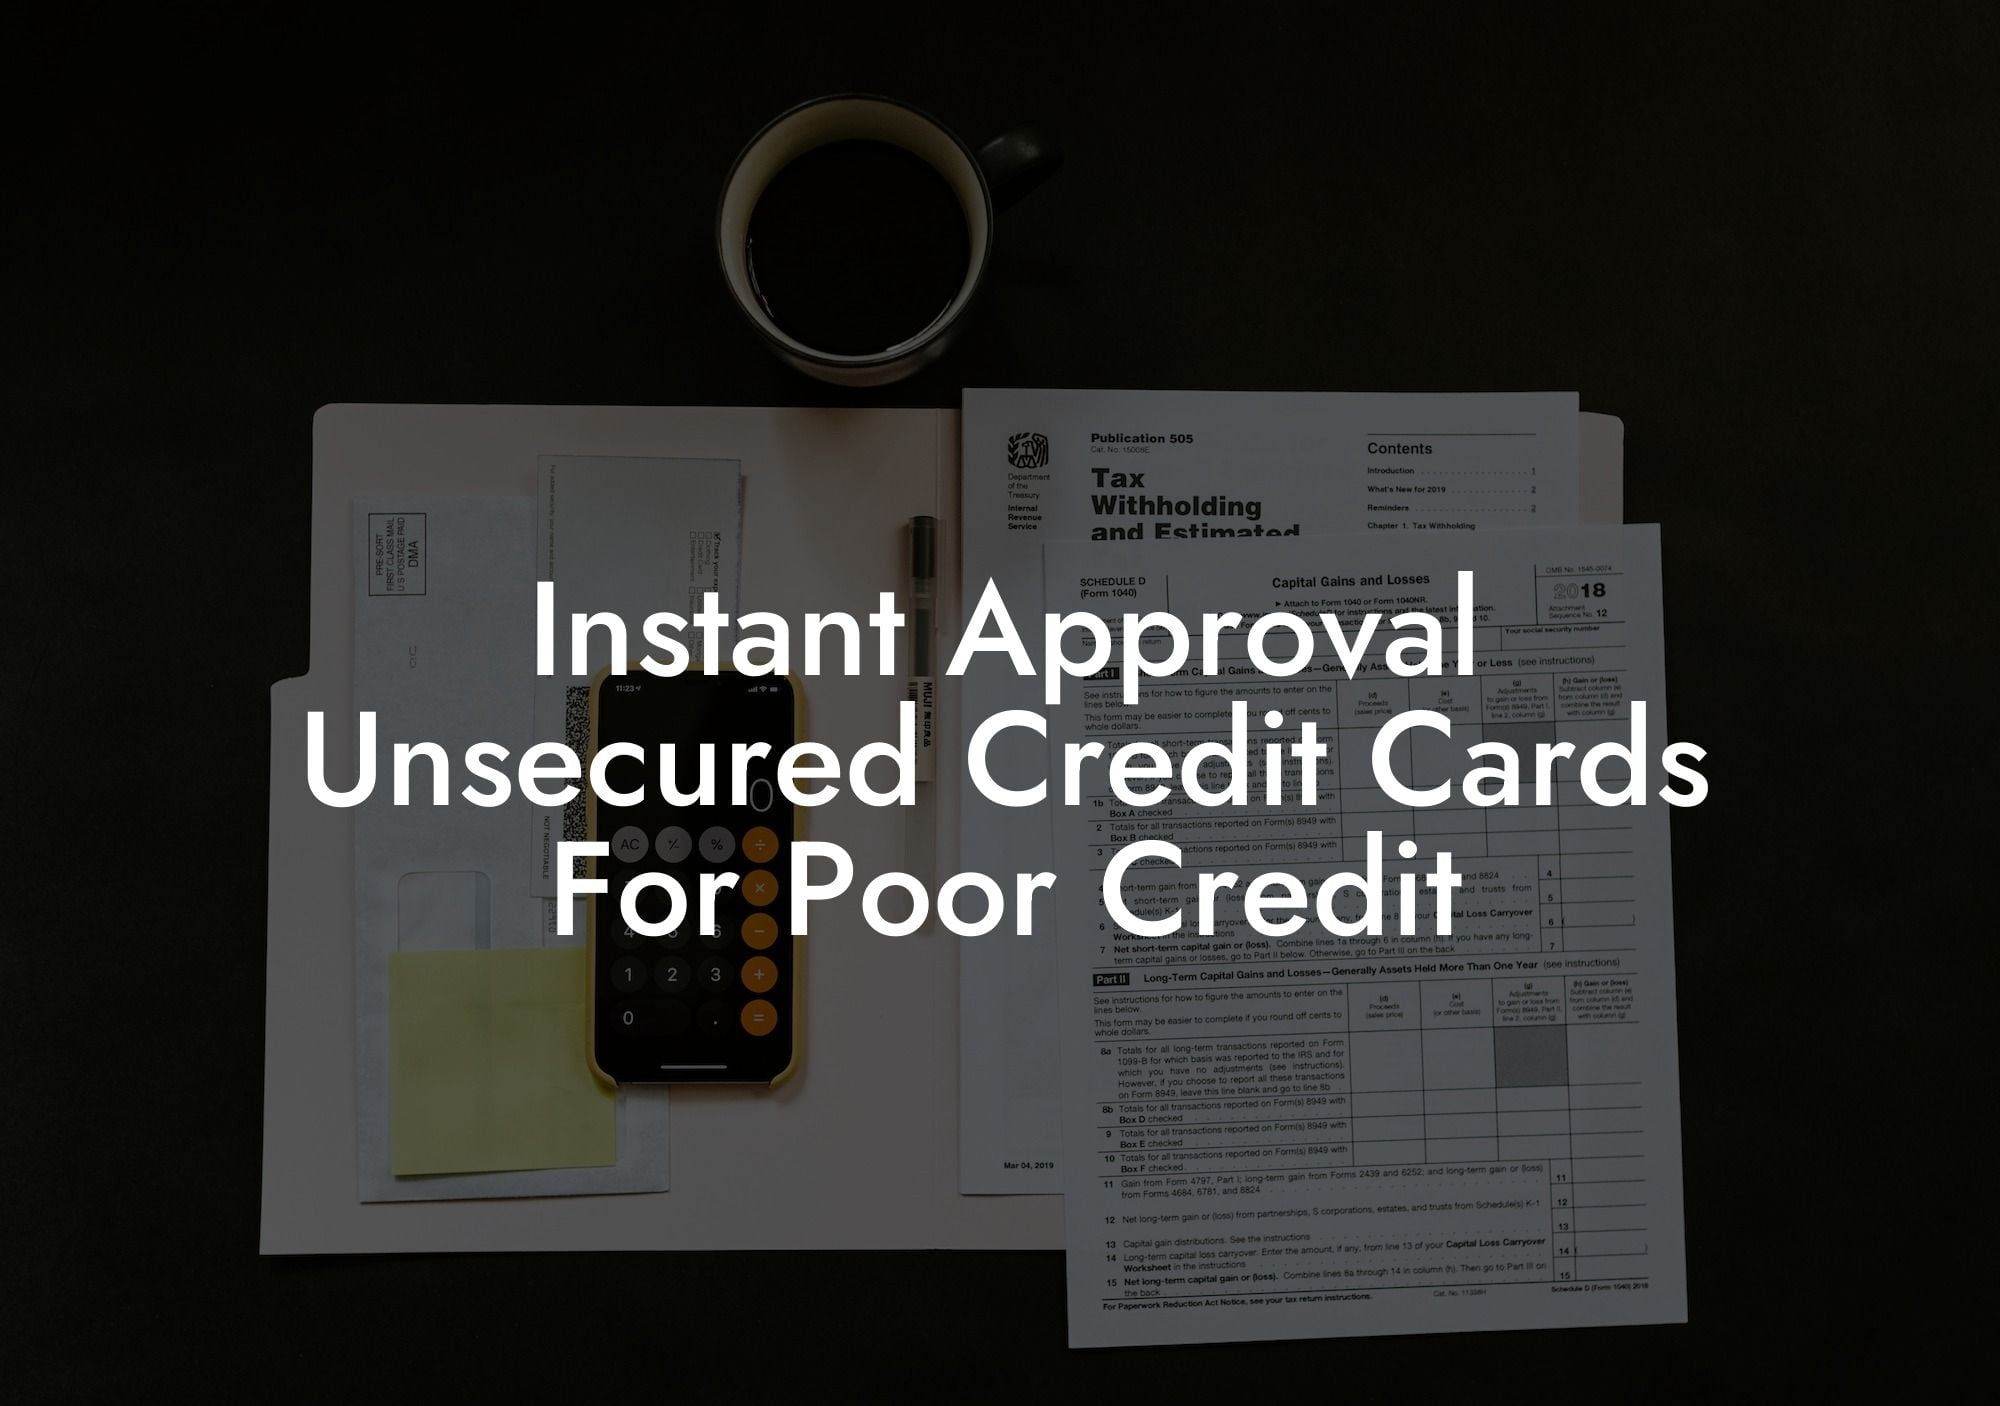 Instant Approval Unsecured Credit Cards For Poor Credit